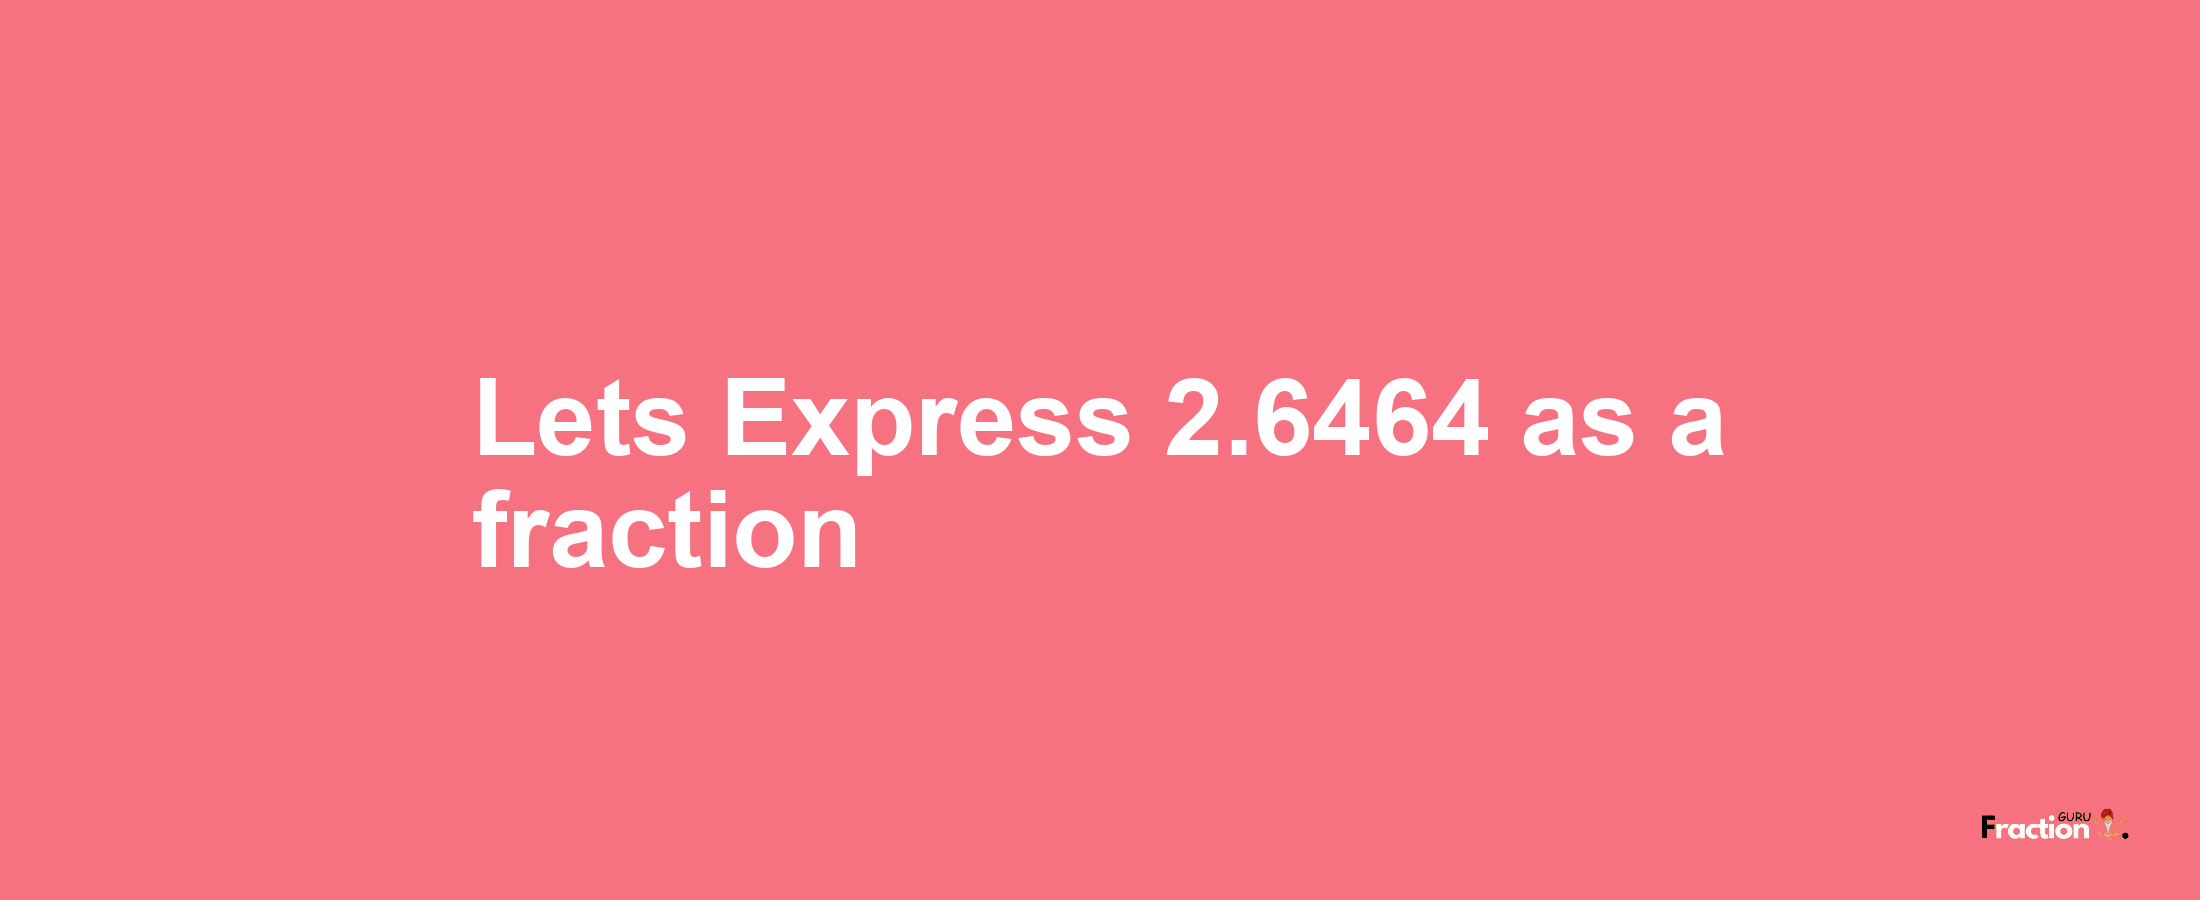 Lets Express 2.6464 as afraction